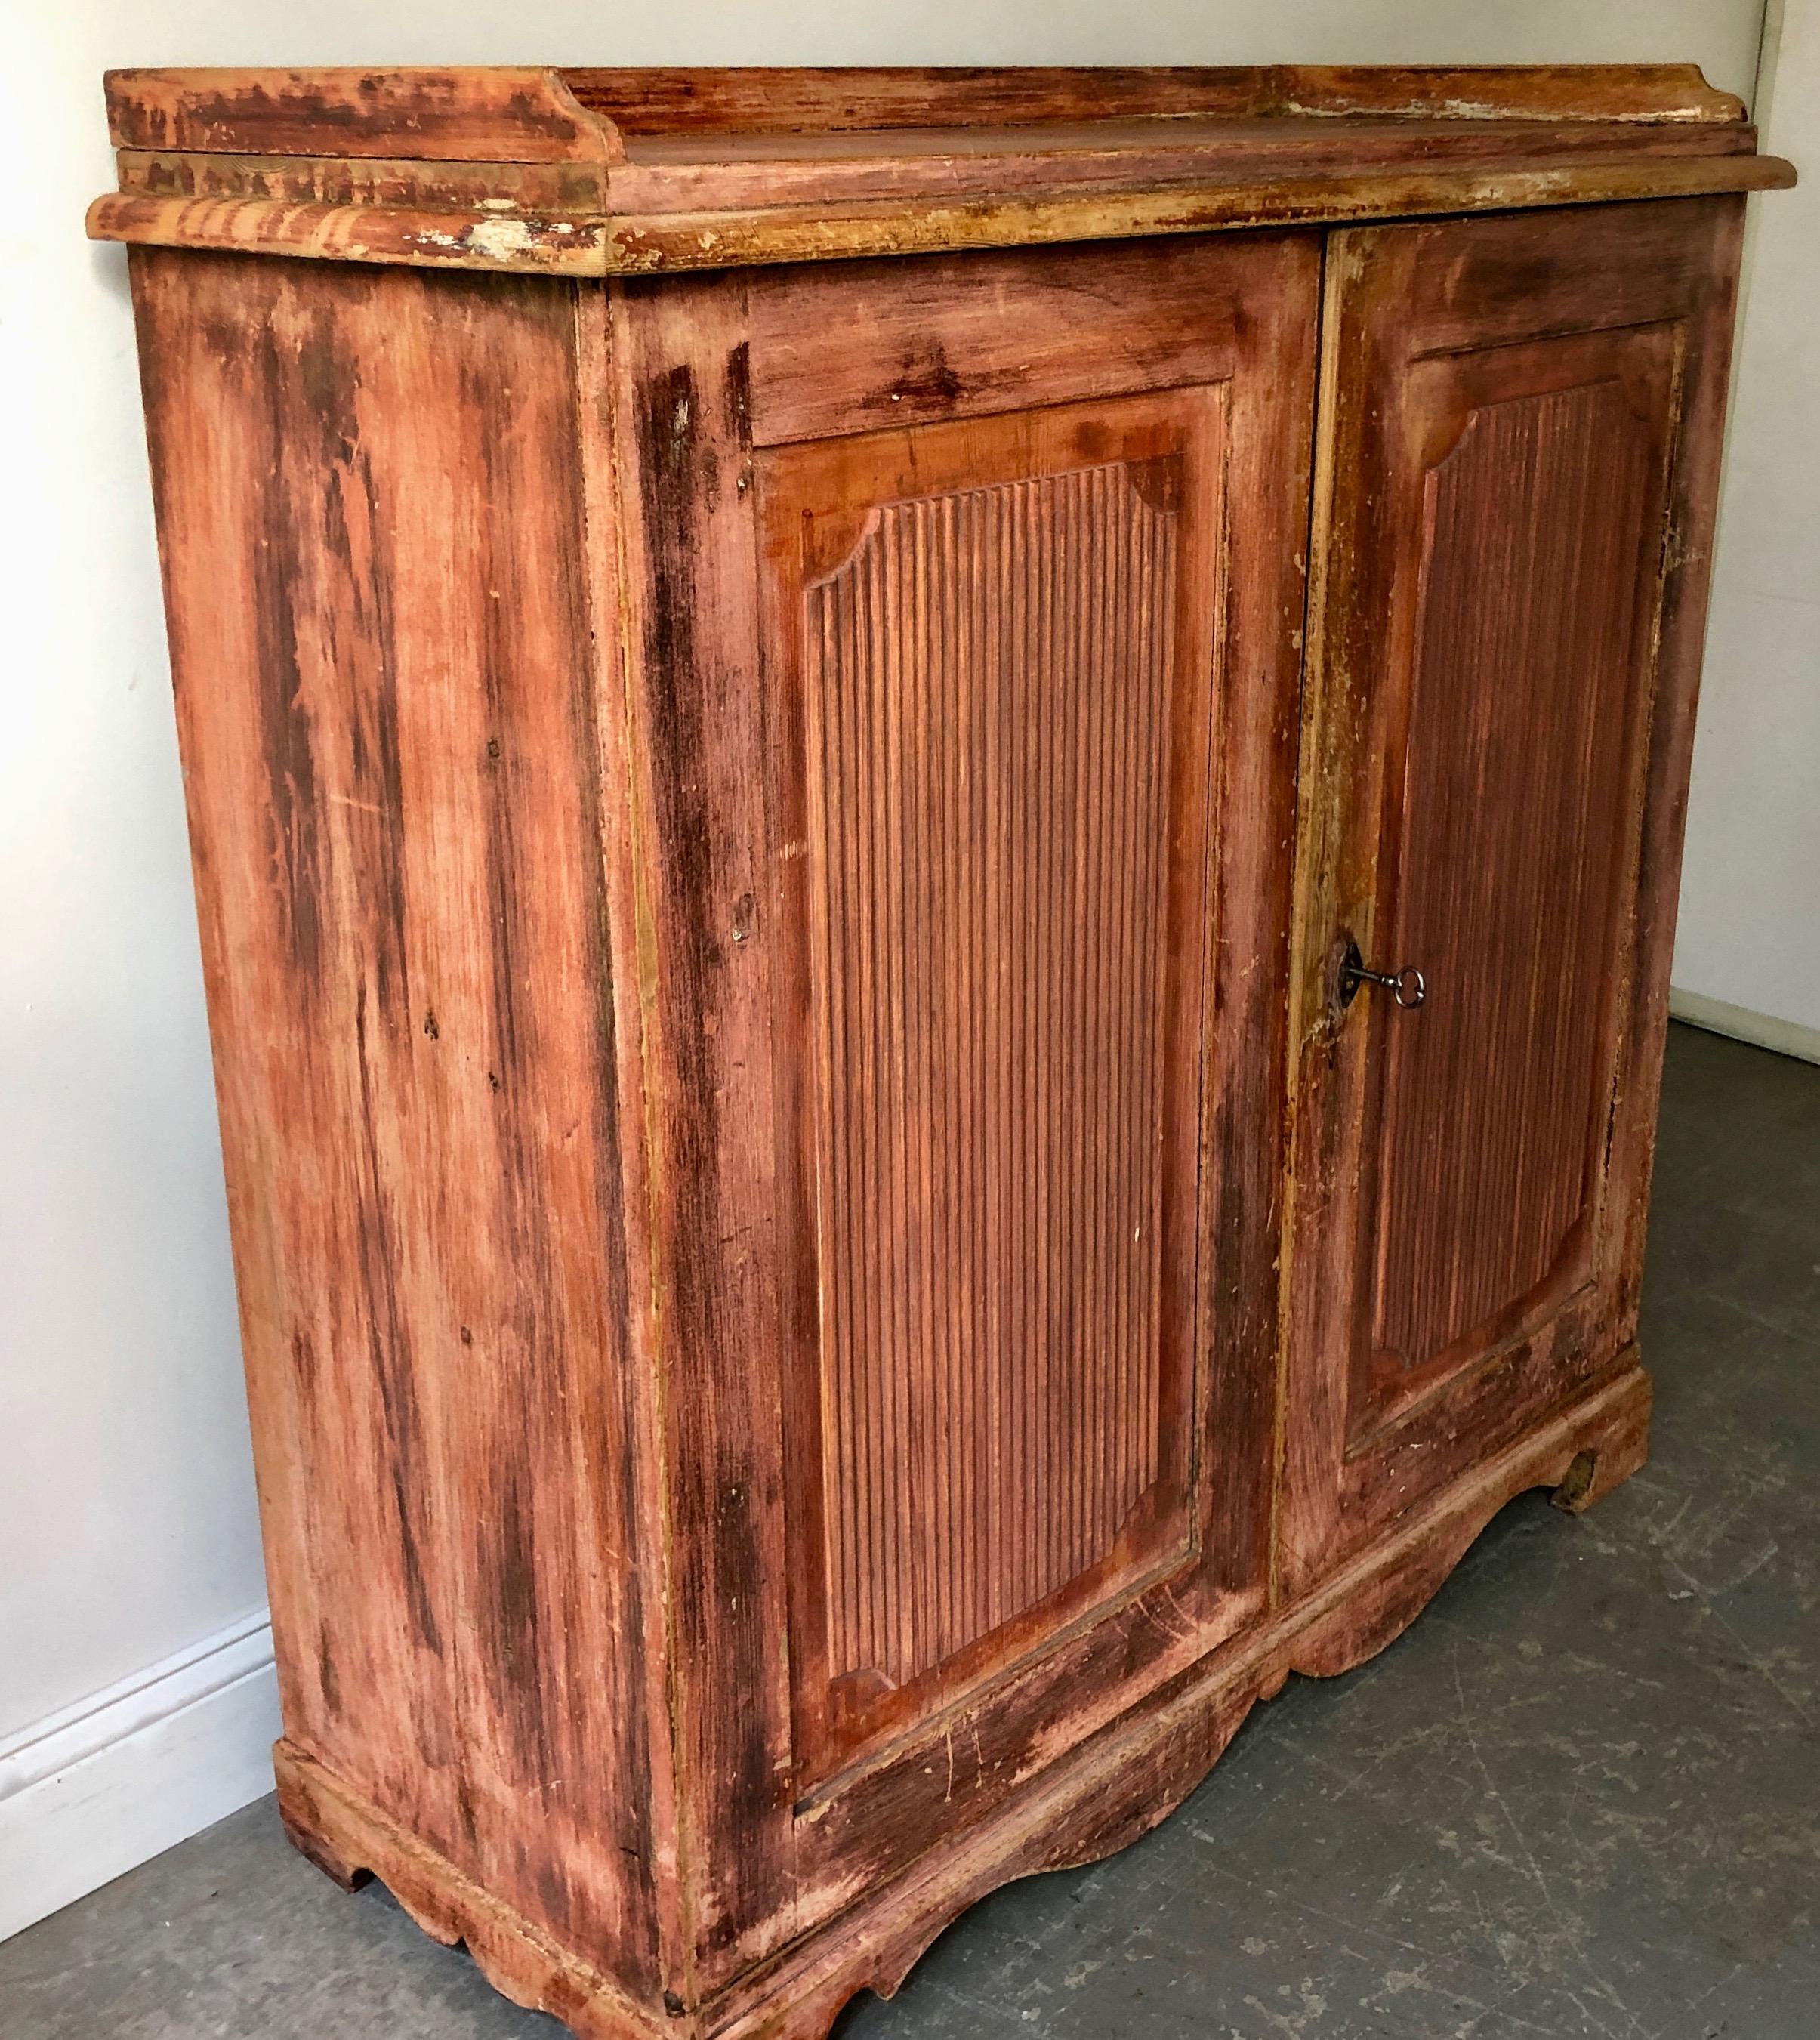 Gustavian style sideboard, circa 1850, Sweden with wonderful original found worn reddish patina. Classic proportions with carved reeded panel doors, gallery wooden top and carved feet.
More than ever, we selected the best, the rarest, the unusual,